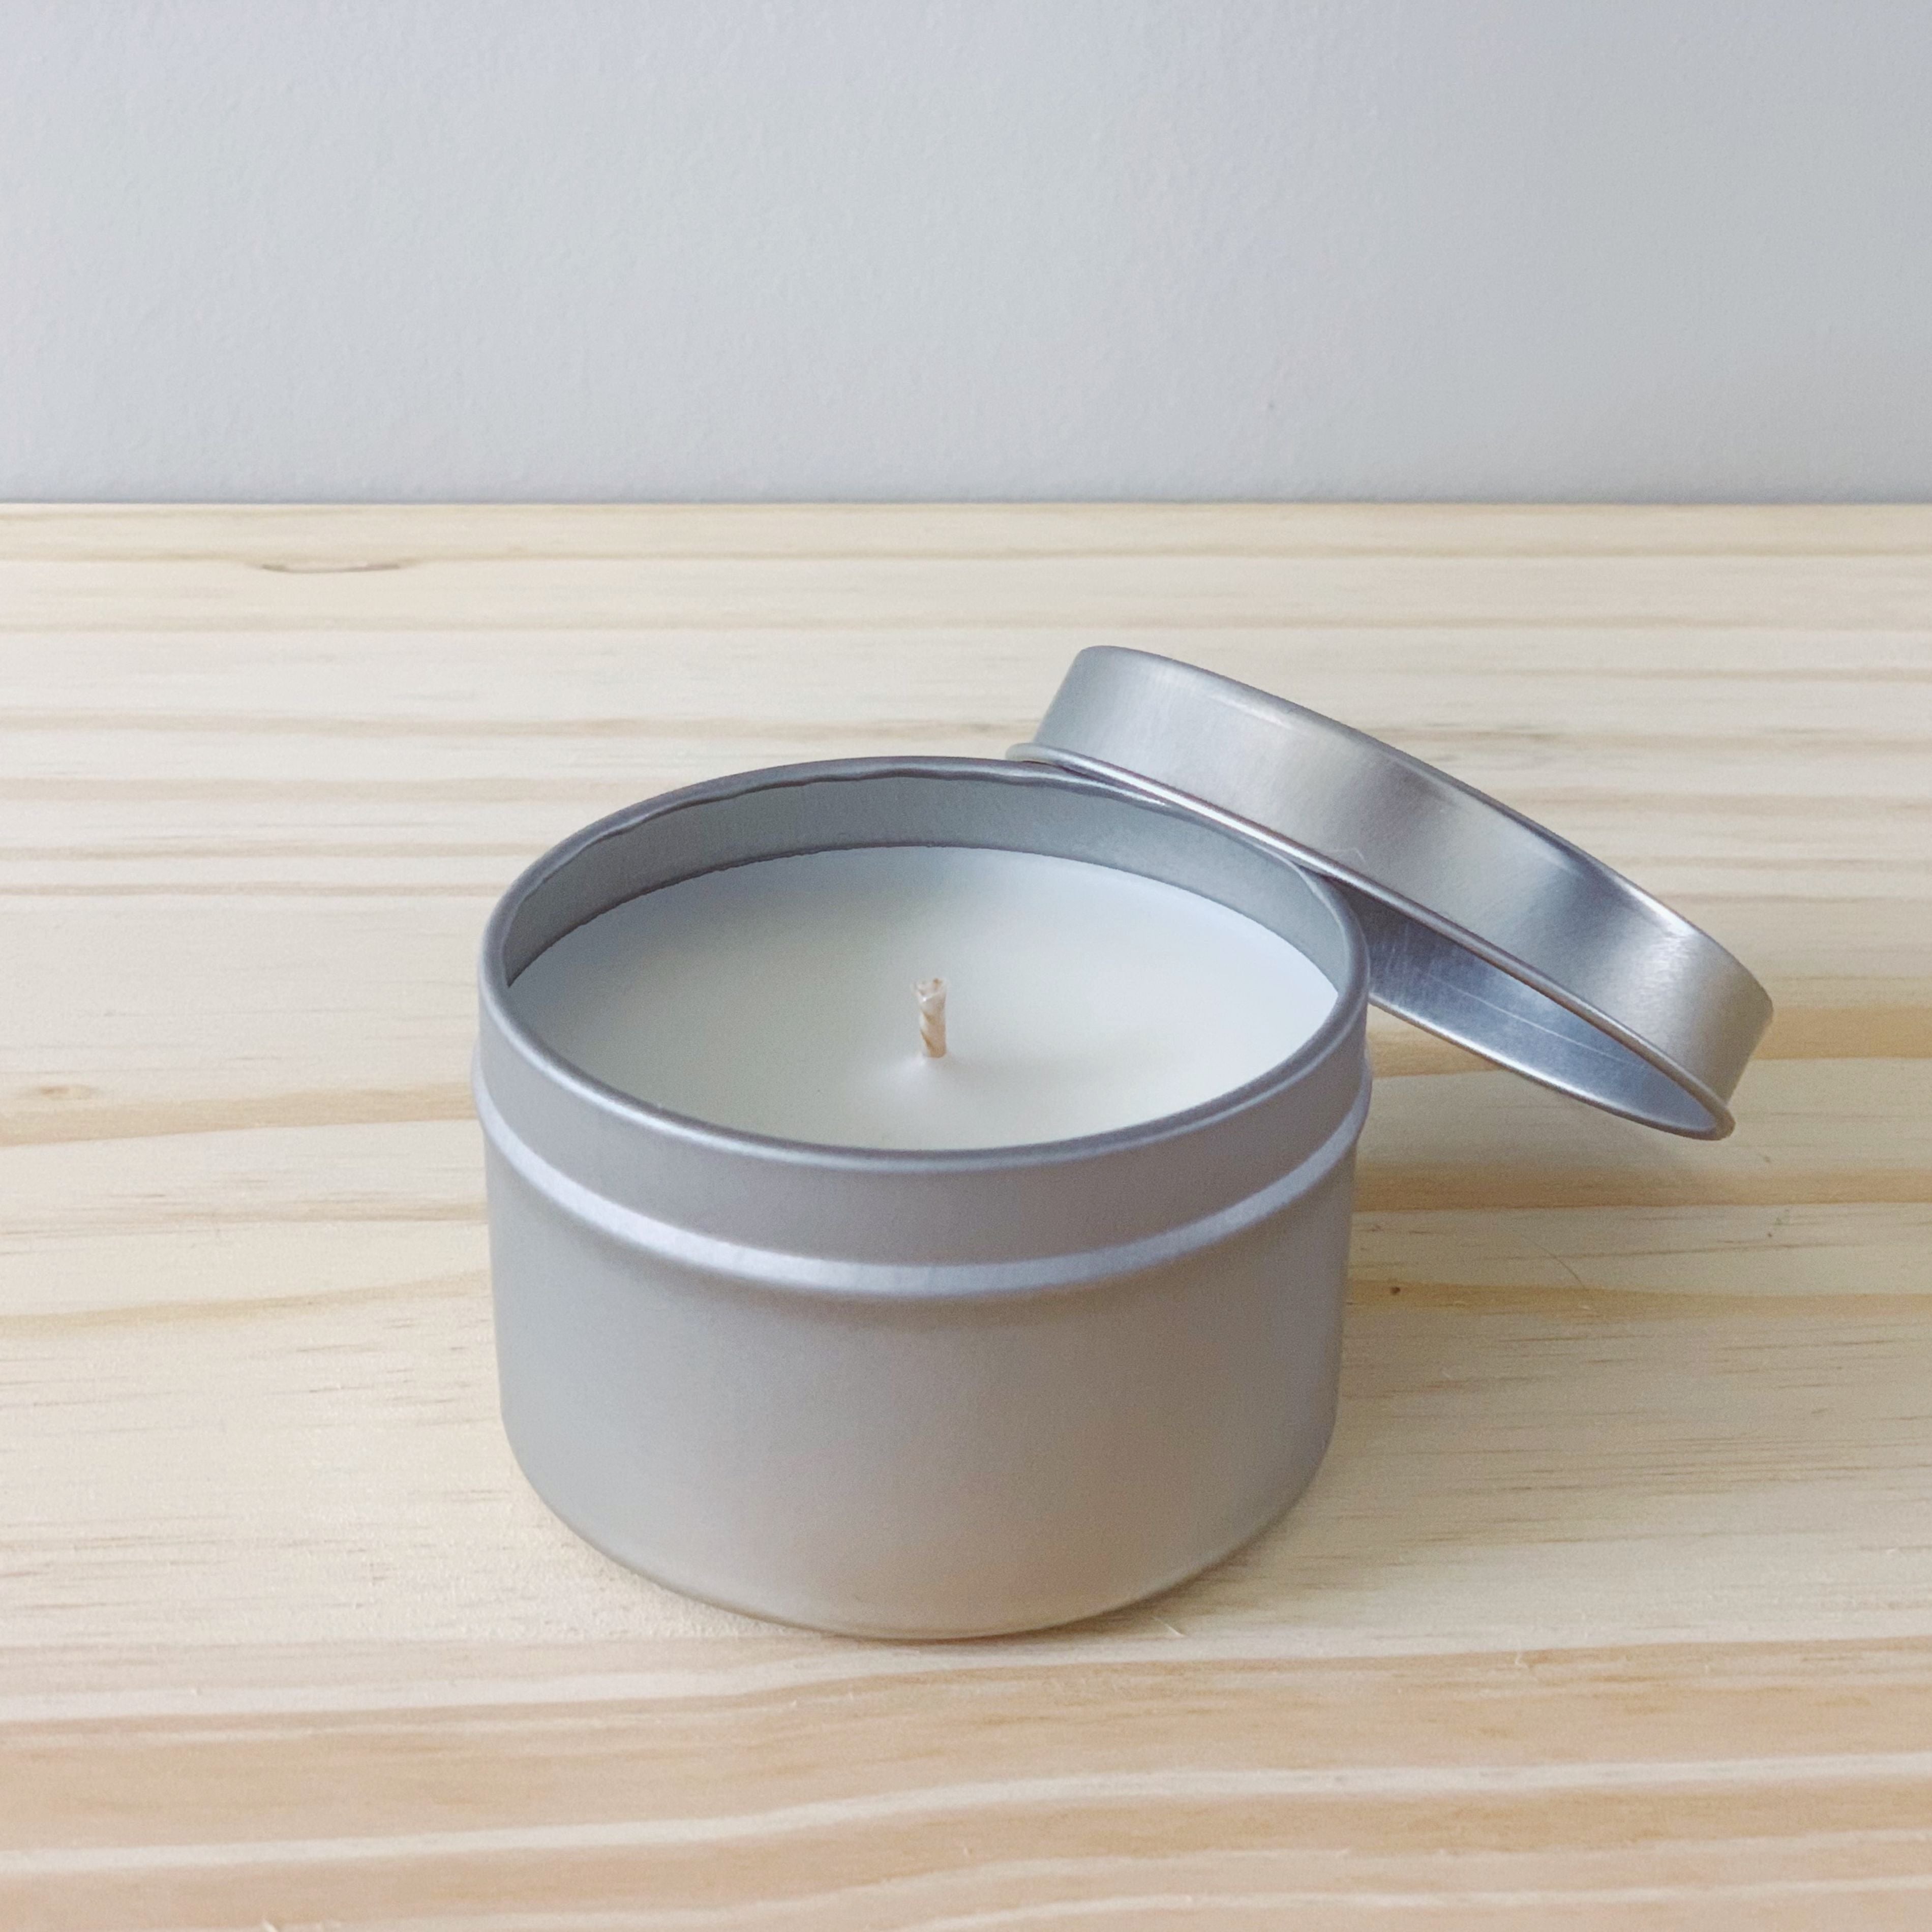 A single silver candle tin is shown on a wood table with a light colored background. The top of the candle is visible and the lid is resting on the back right of the tin.